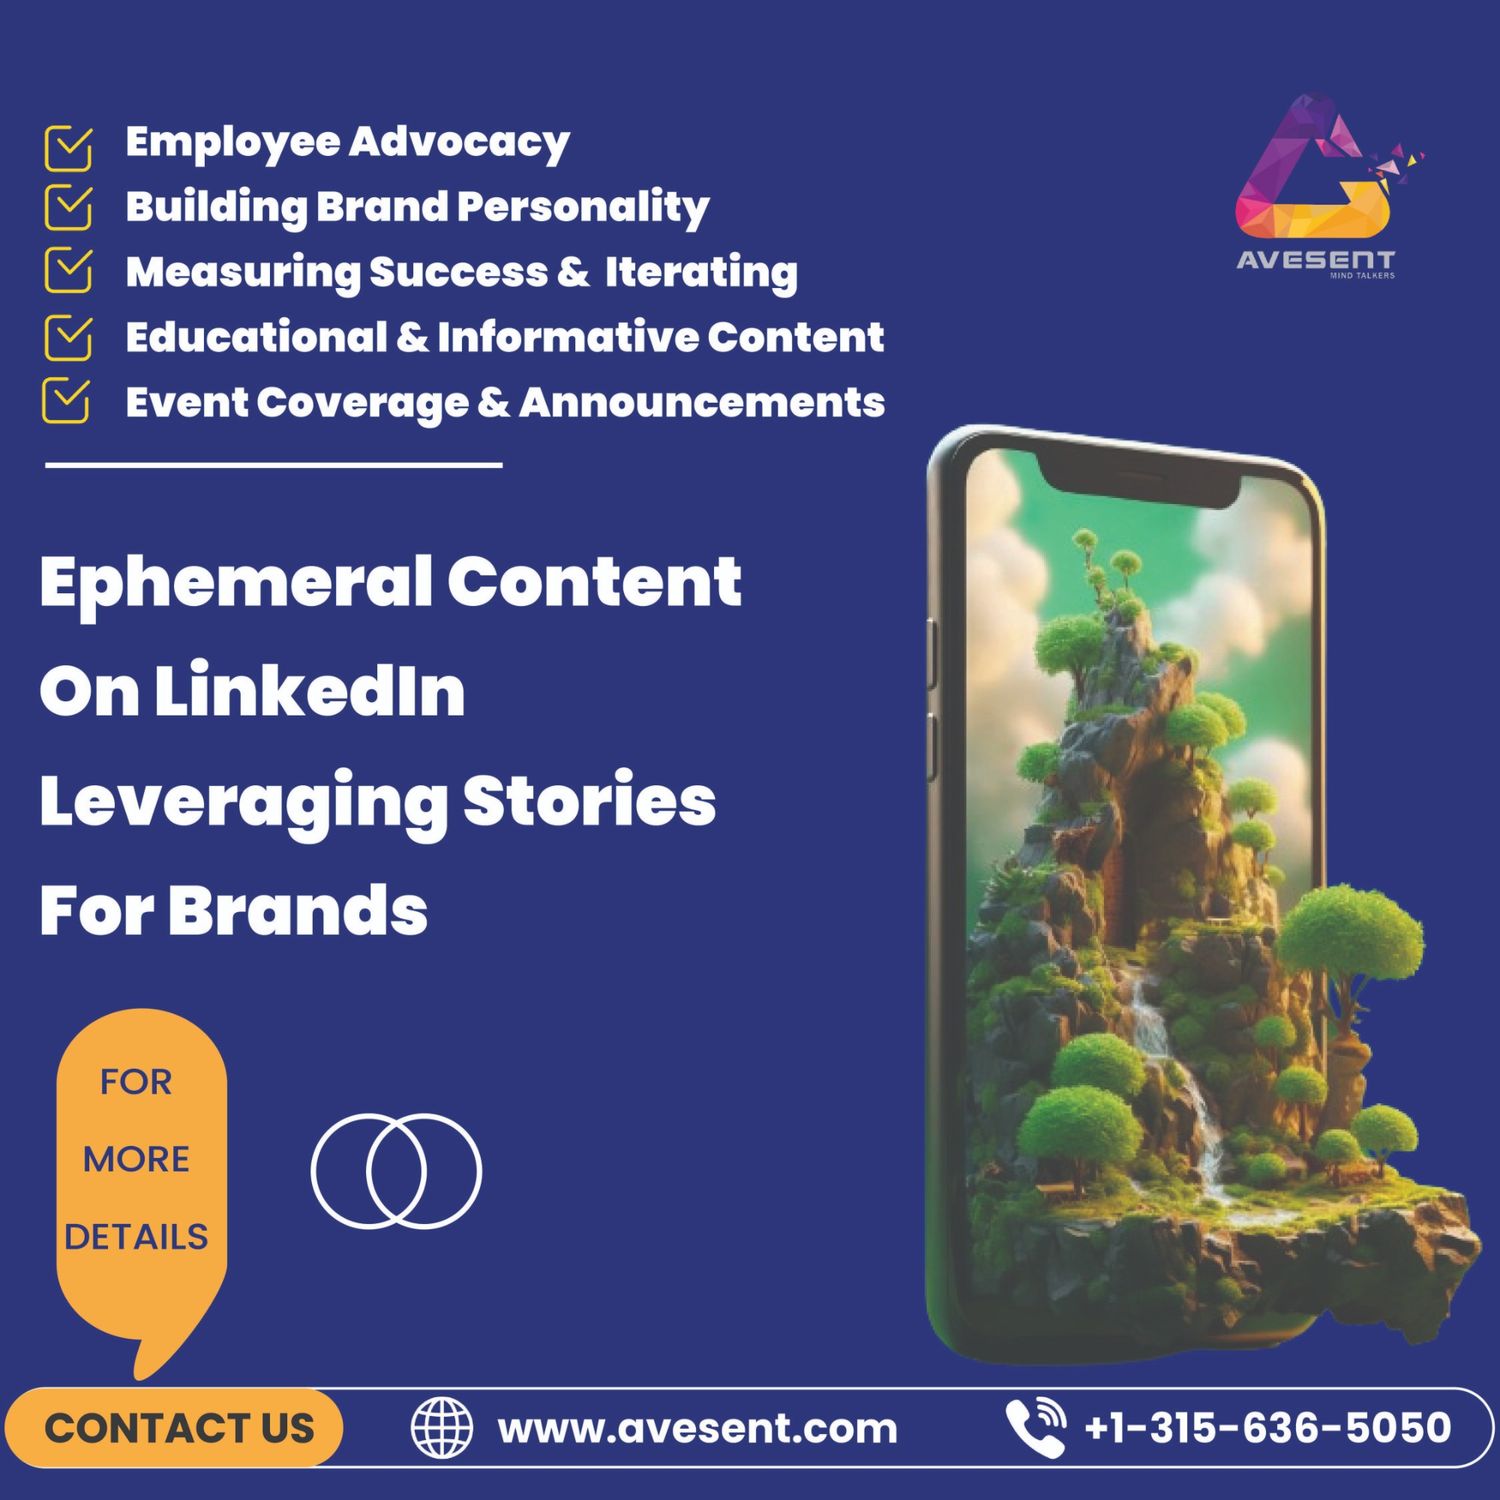 You are currently viewing Ephemeral Content on LinkedIn Leveraging Stories for Brands